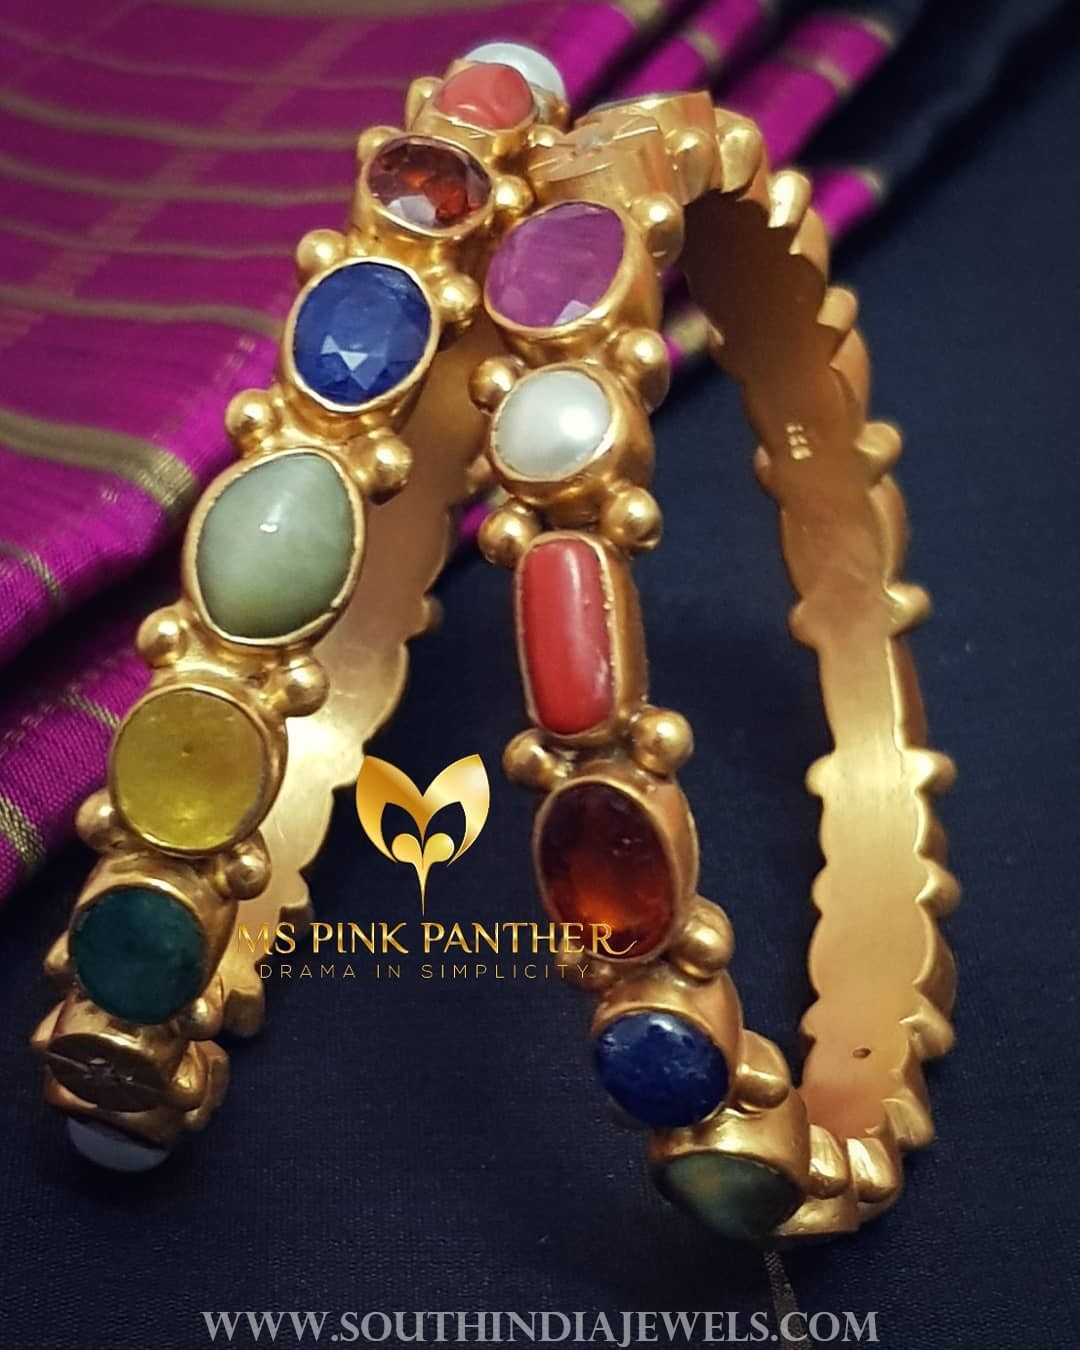 Gorgeous Navarathna Bangles From Ms Pink Panther